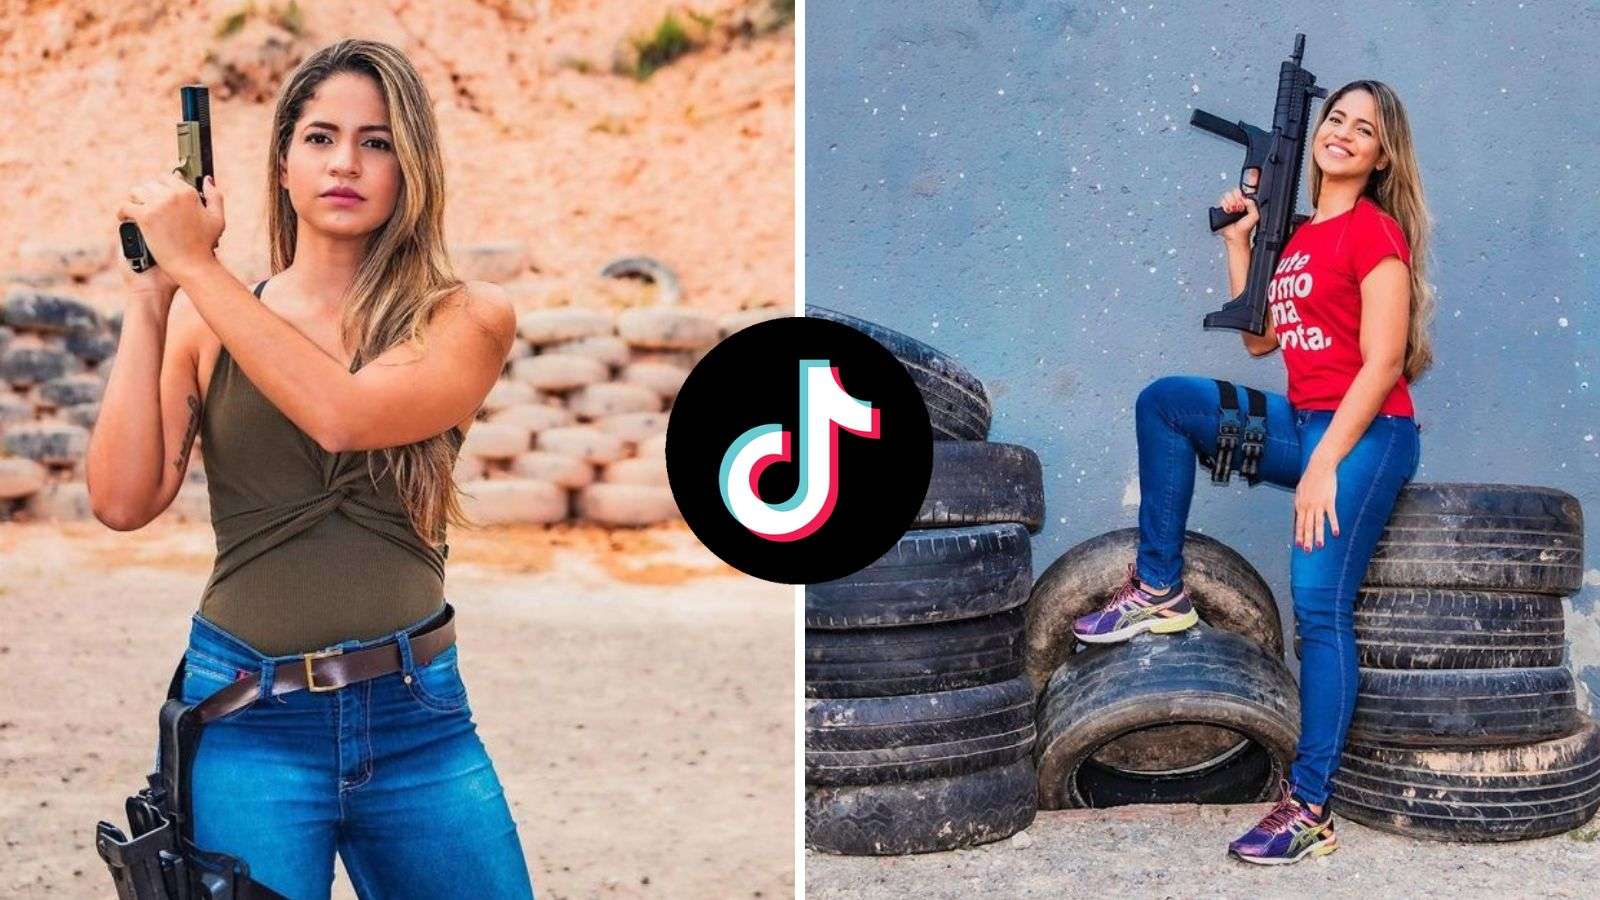 Police officer loses salary after modeling with guns from work on TikTok